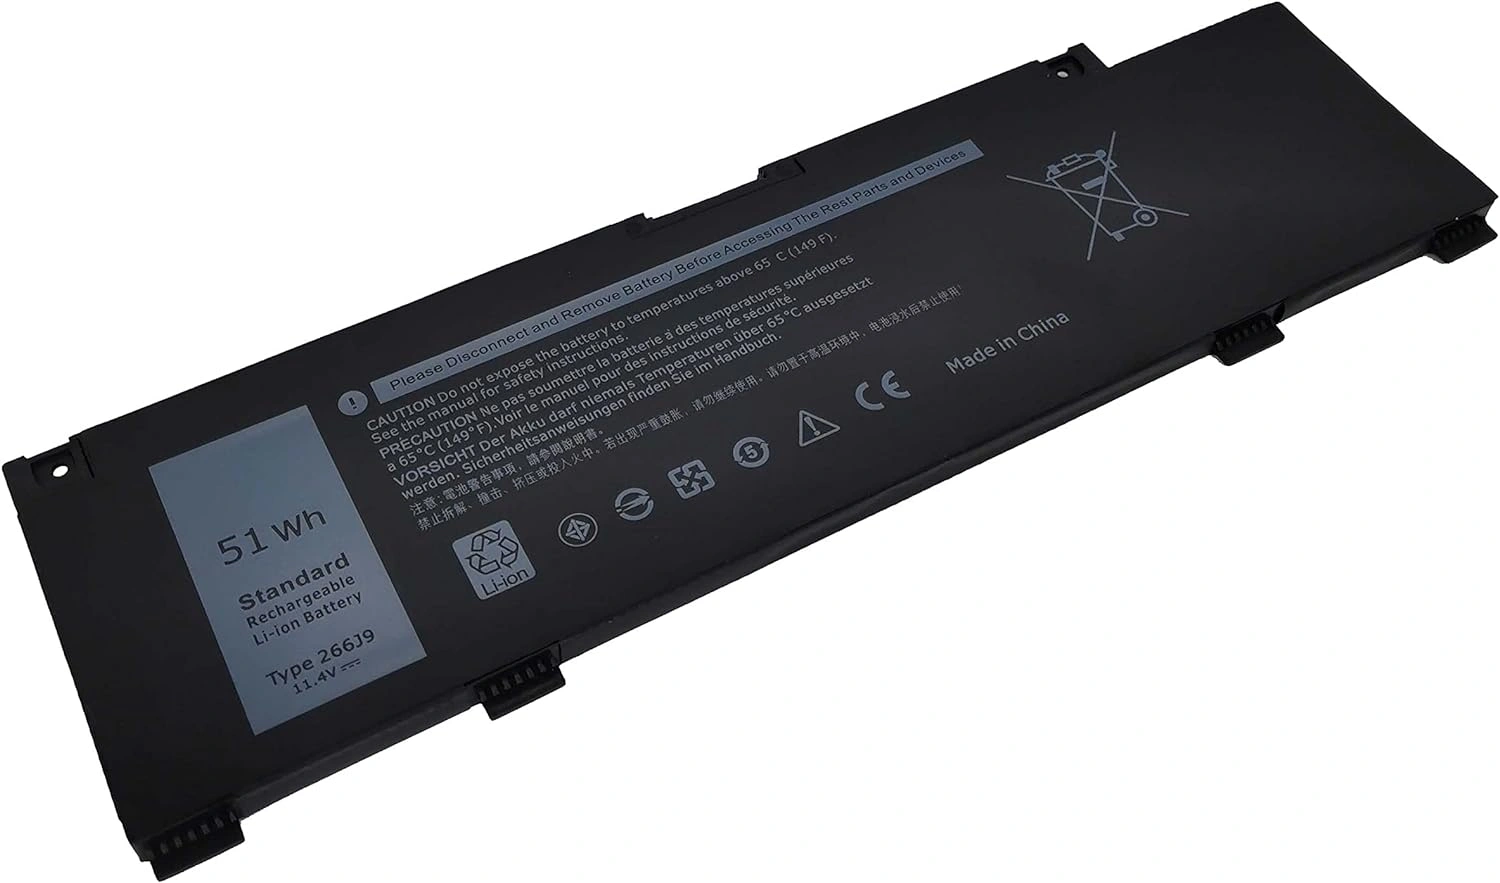 Dell G3 3590 3500 G5 5500 5505 Inspiron 5490 Series 11.4V 51Wh battery-M4GWP/PN1VN-3